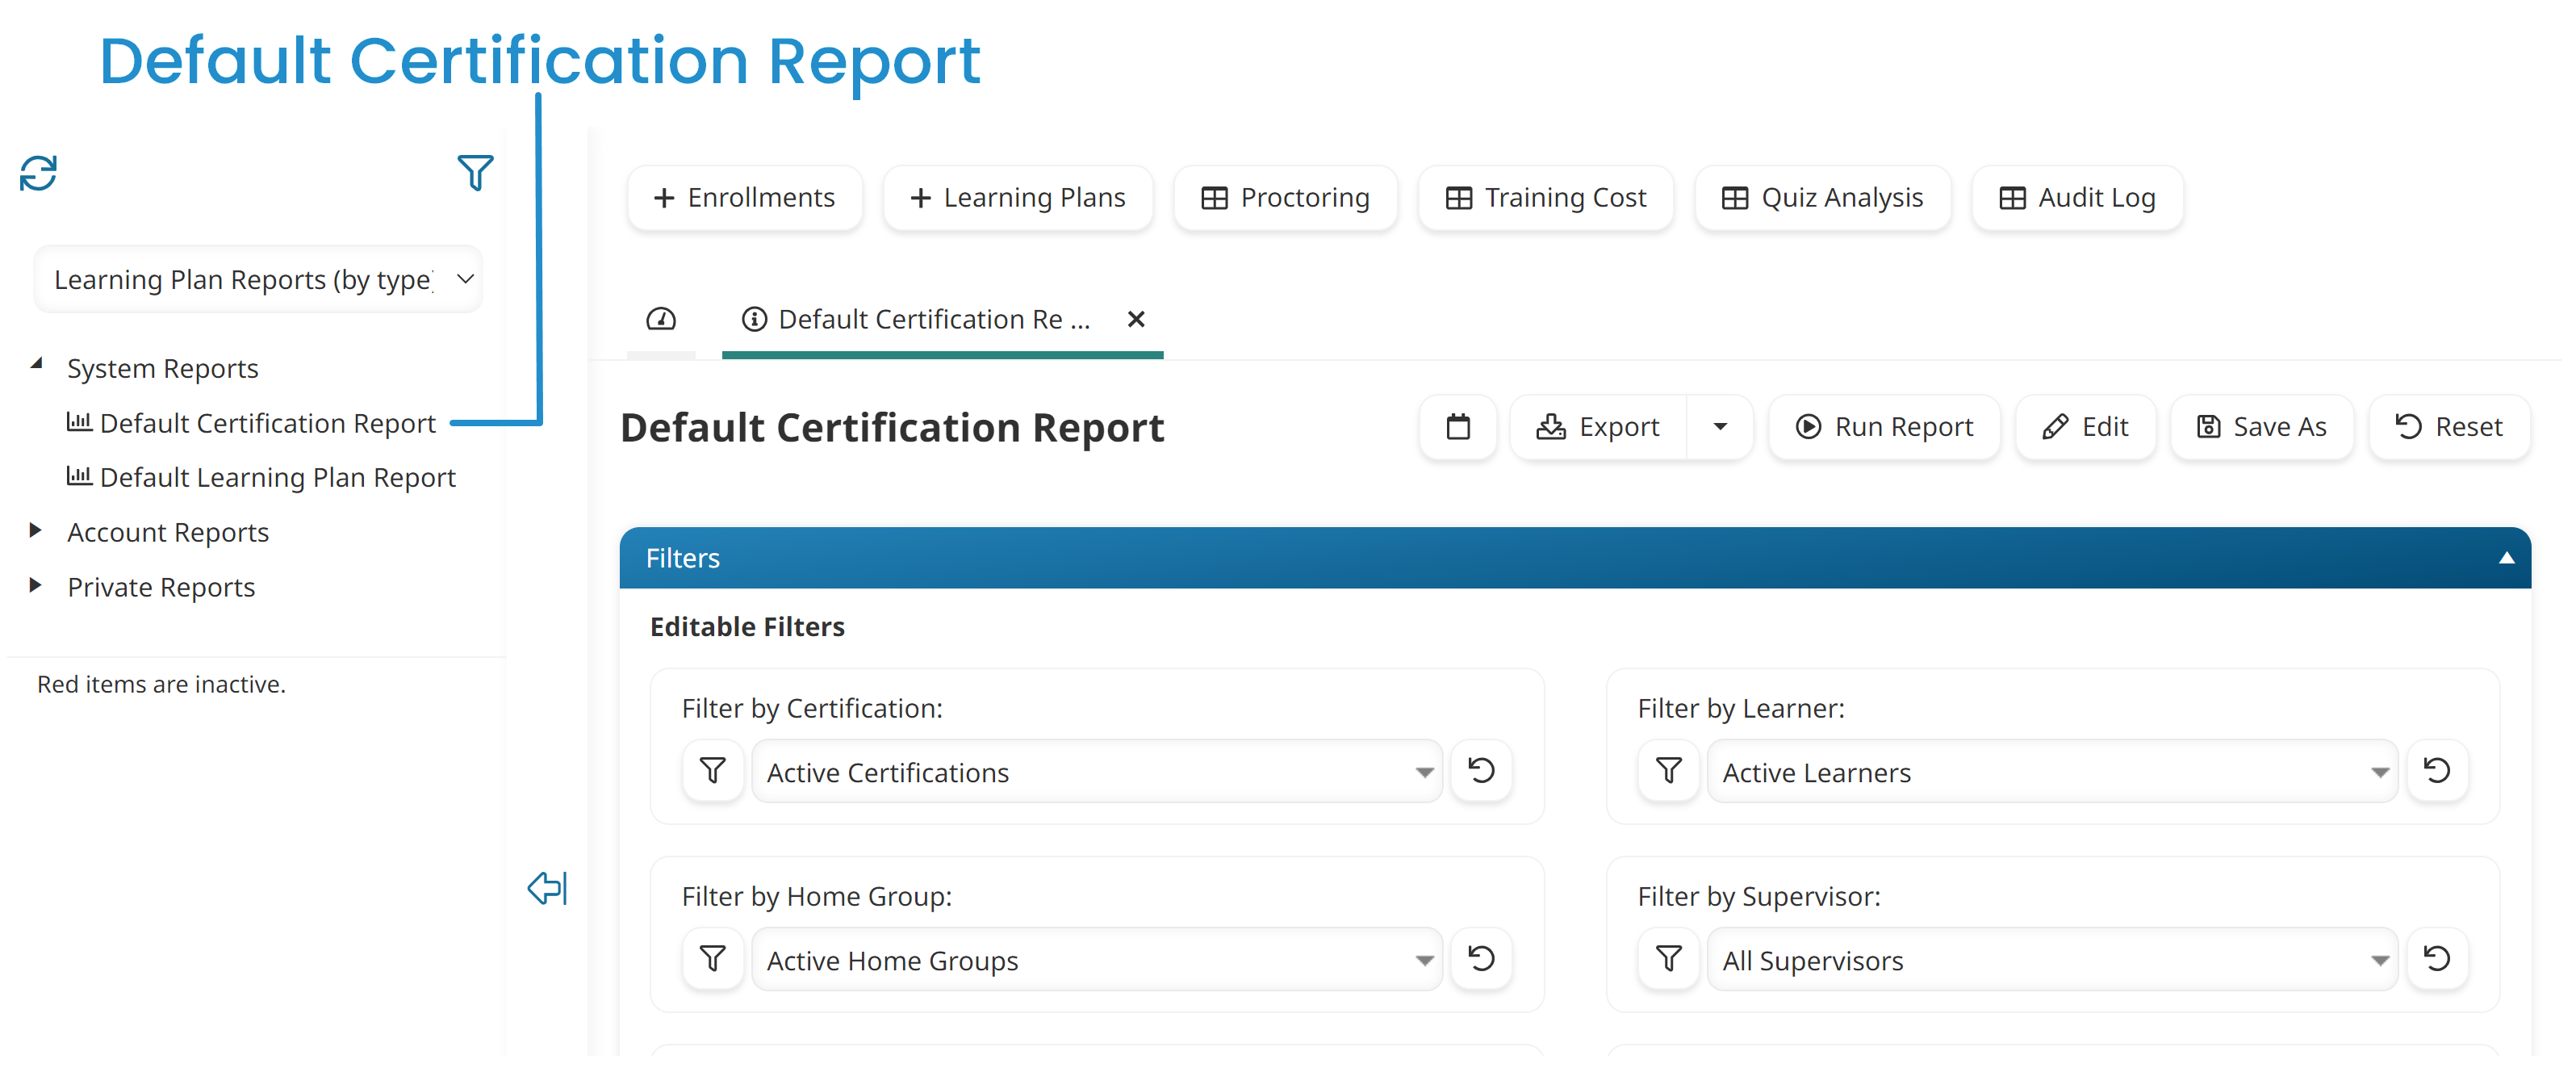 System%20Reports%20-%20Default%20Certification%20Report%2020231113